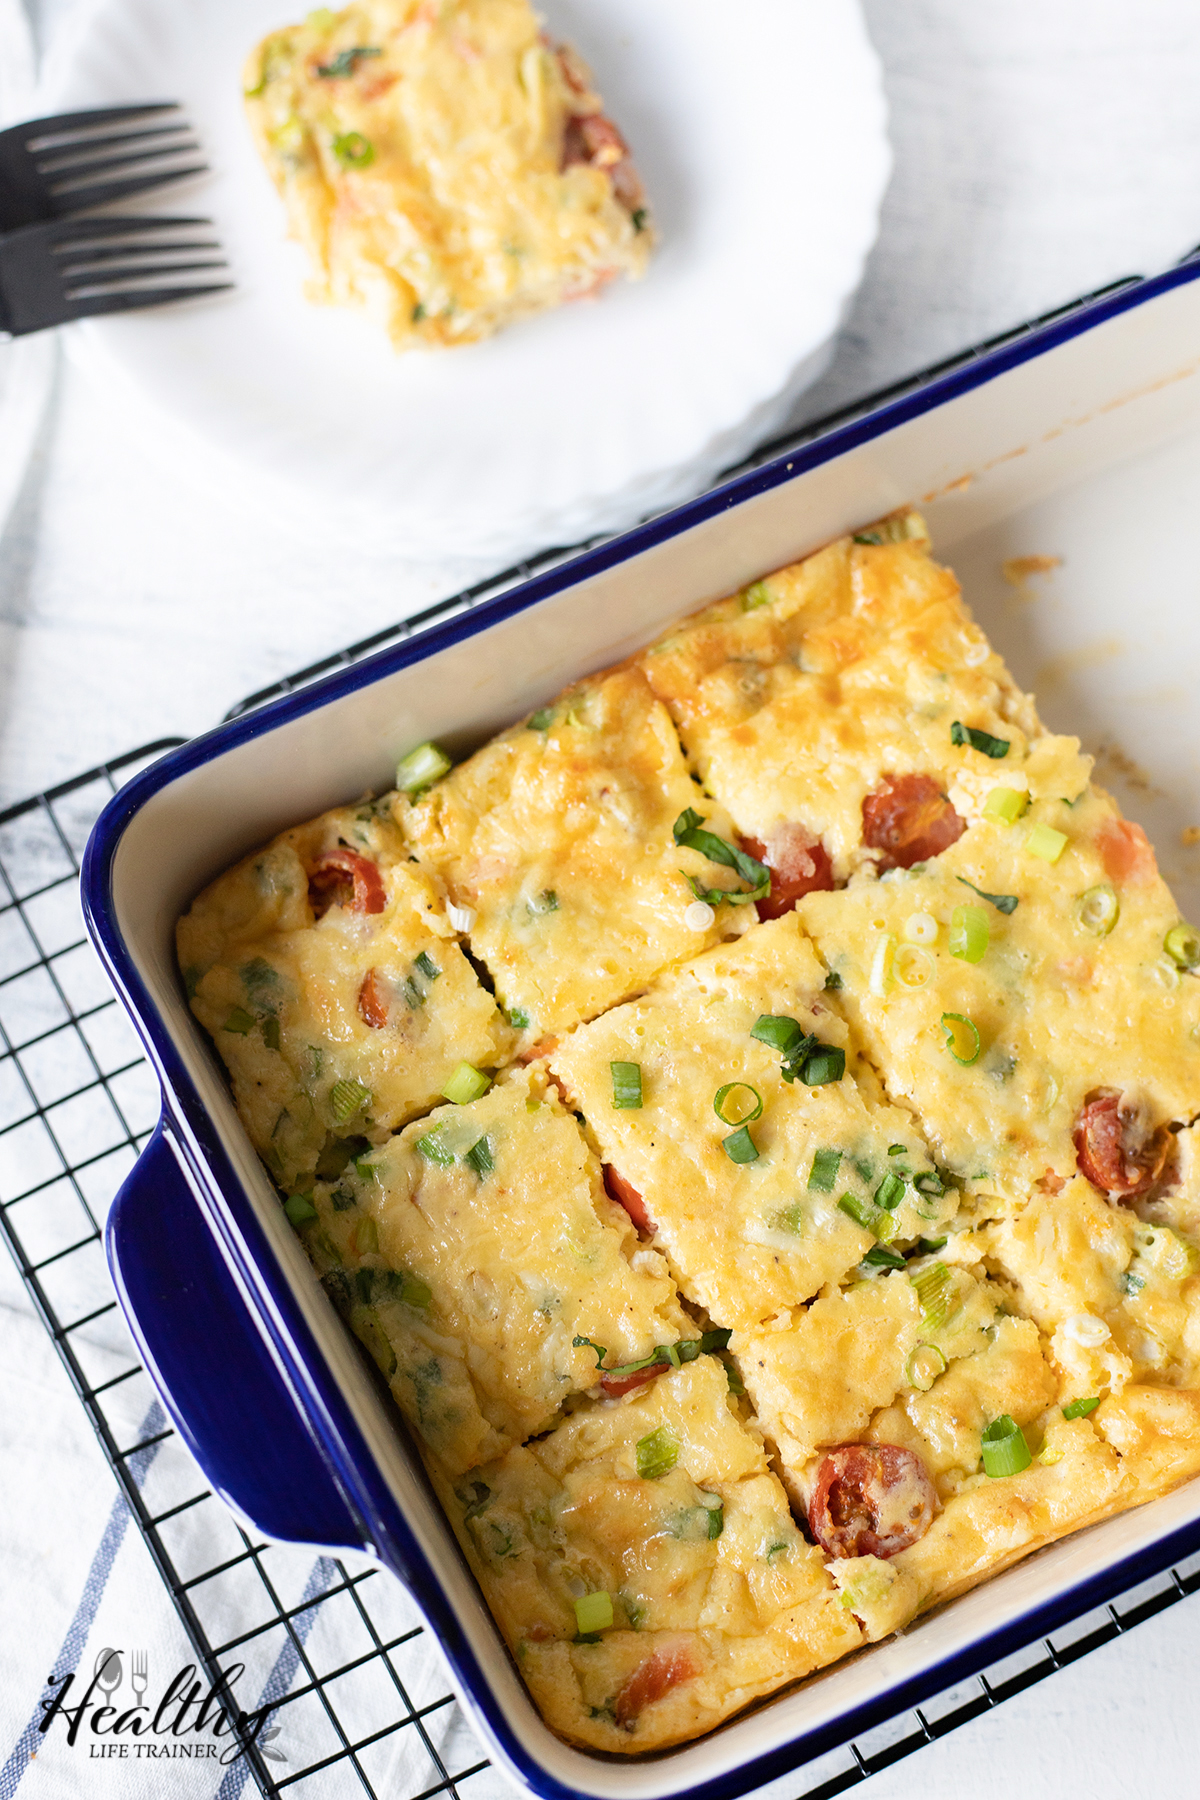 Crustless Quiche Recipe With Salmon And Eggs - Healthy Life Trainer